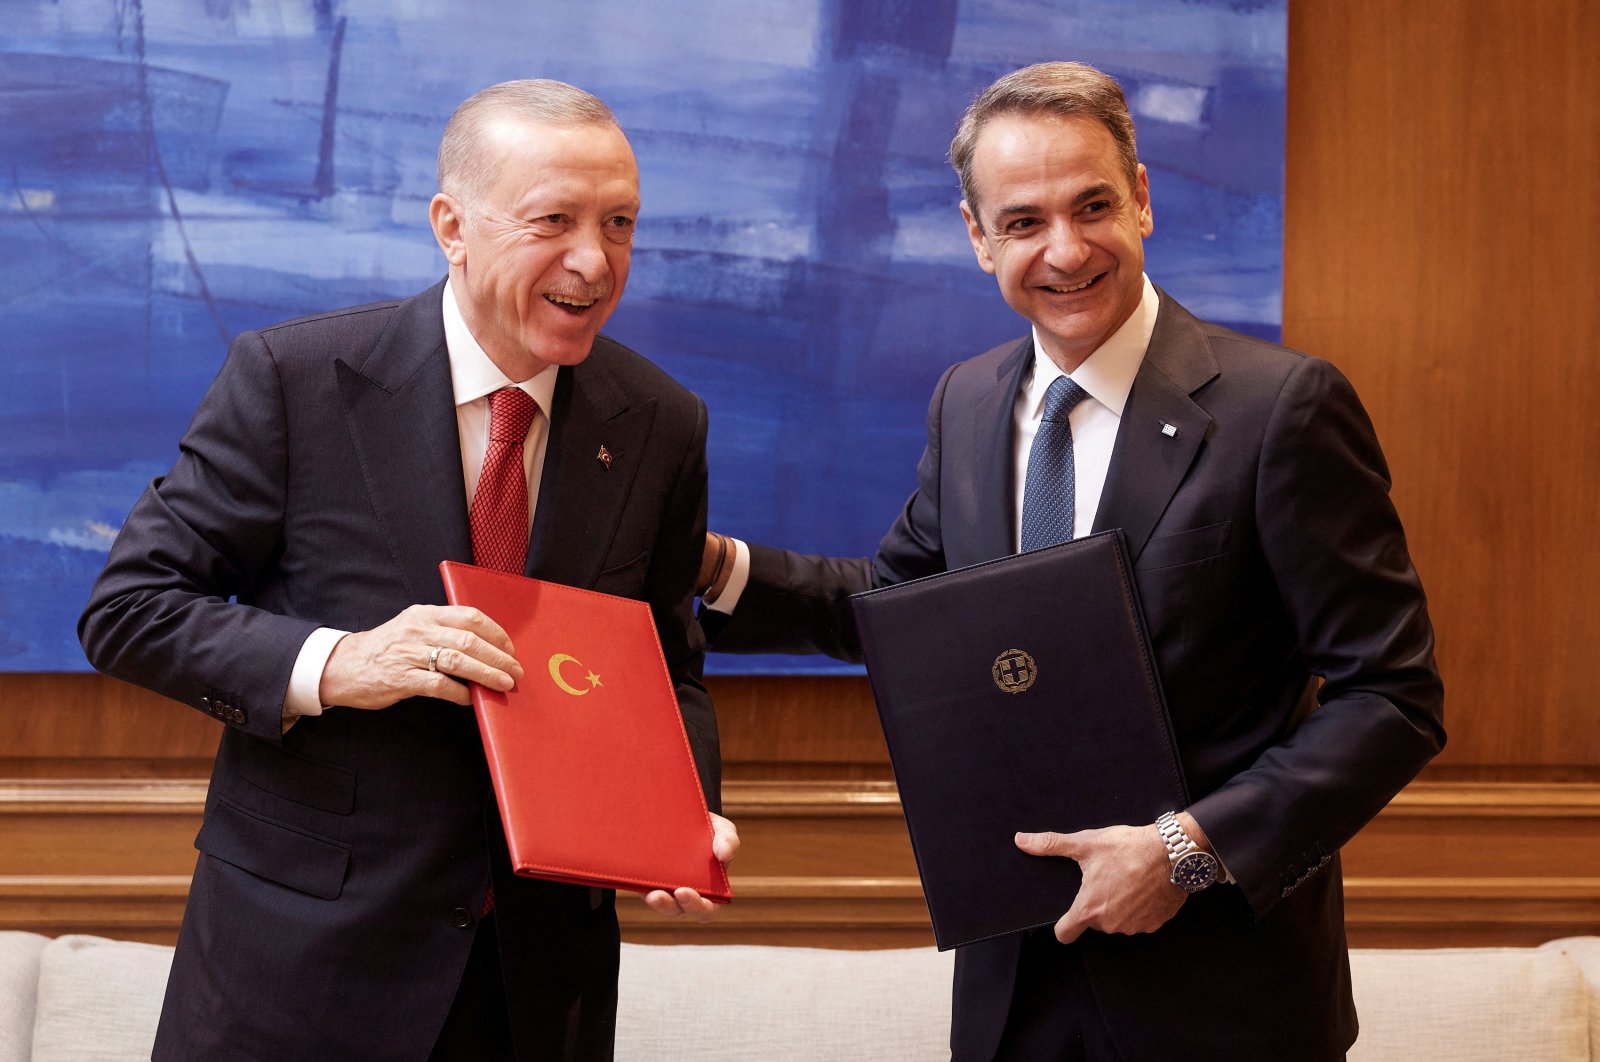 Greek Prime Minister Kyriakos Mitsotakis and President Recep Tayyip Erdoğan smile after signing a joint declaration to pursue good neighborly relations at the Maximos Mansion in Athens, Greece, Dec. 7, 2023. (Reuters Photo)